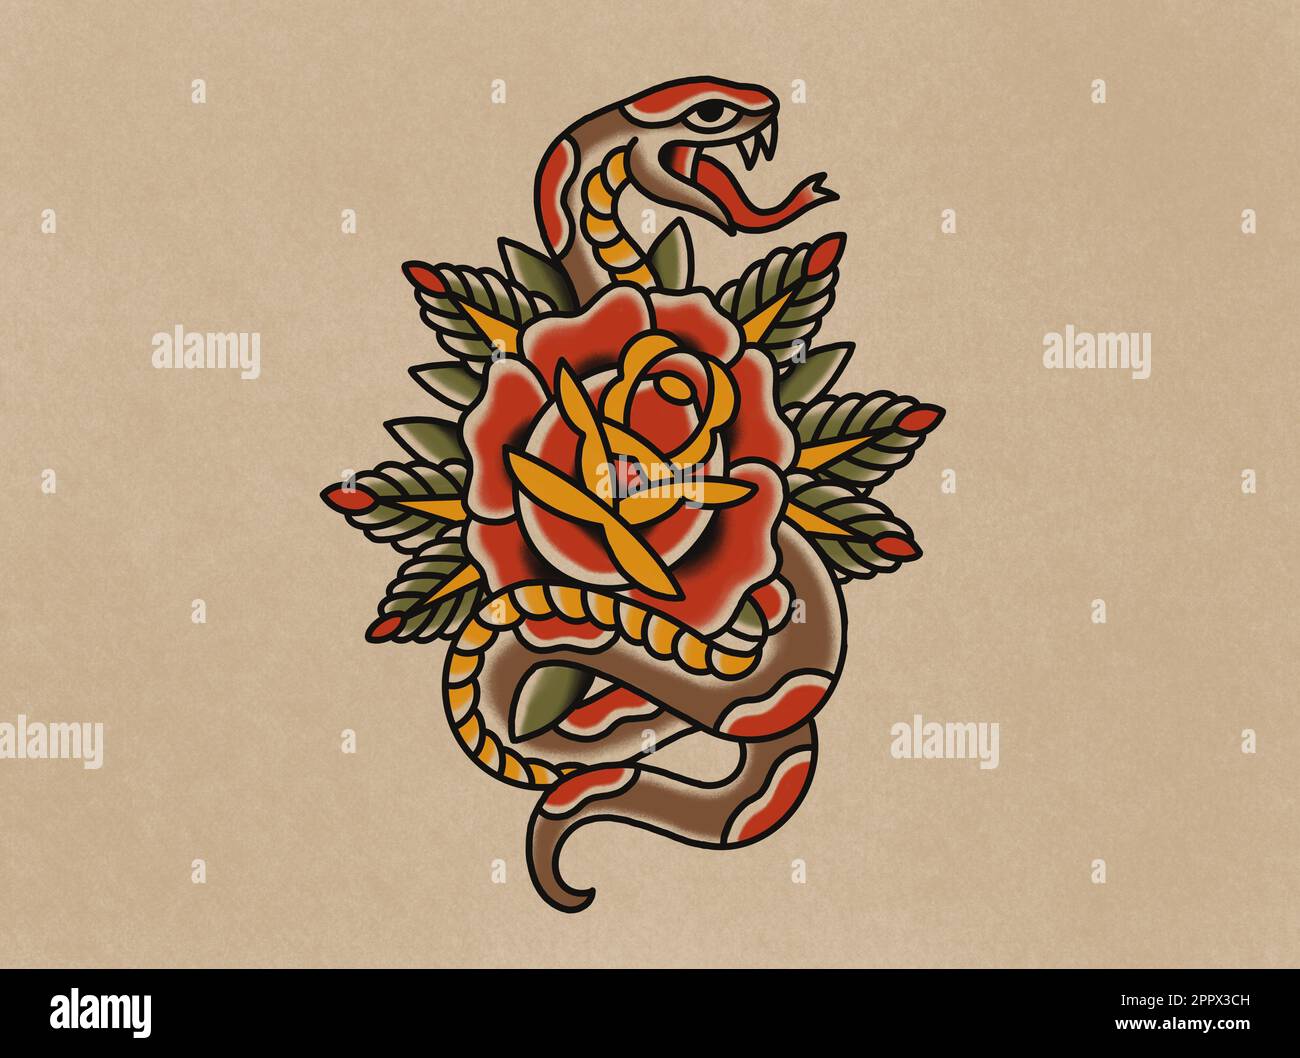 I finished this tattoo template today The default was a snake wrapped  around a rose  rdrawing